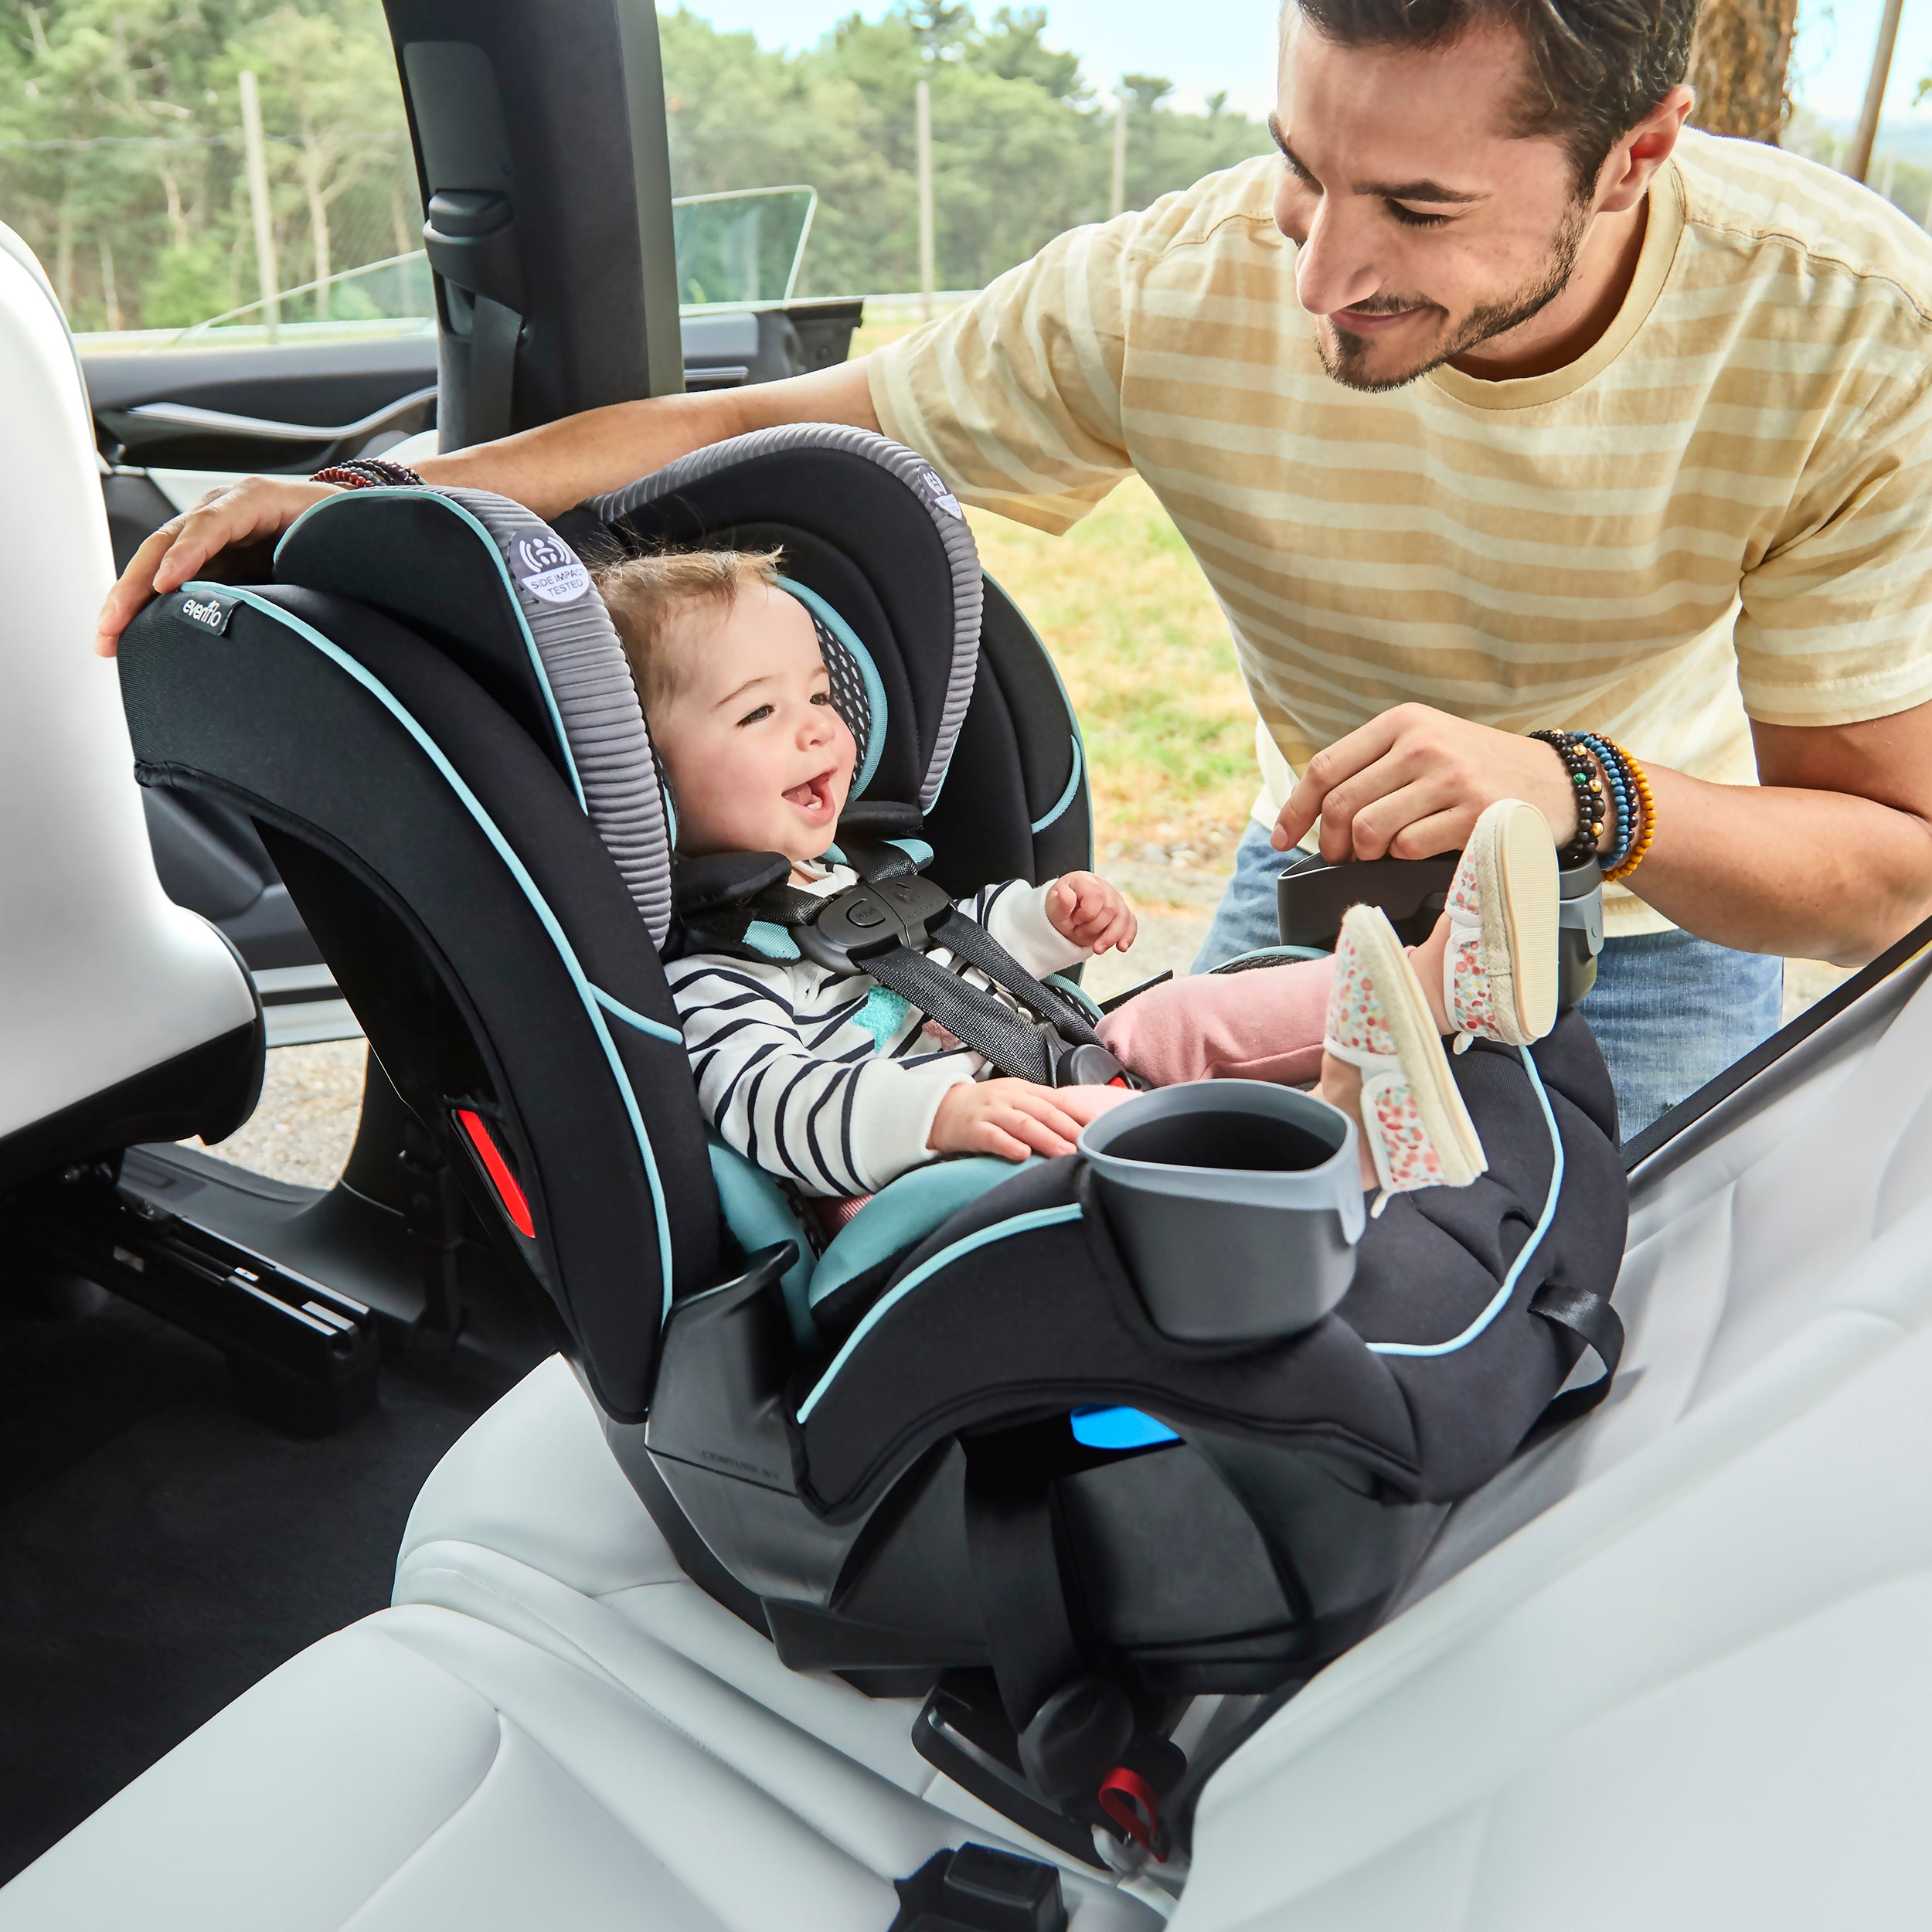 Importance of Car Seats for Babies and Children